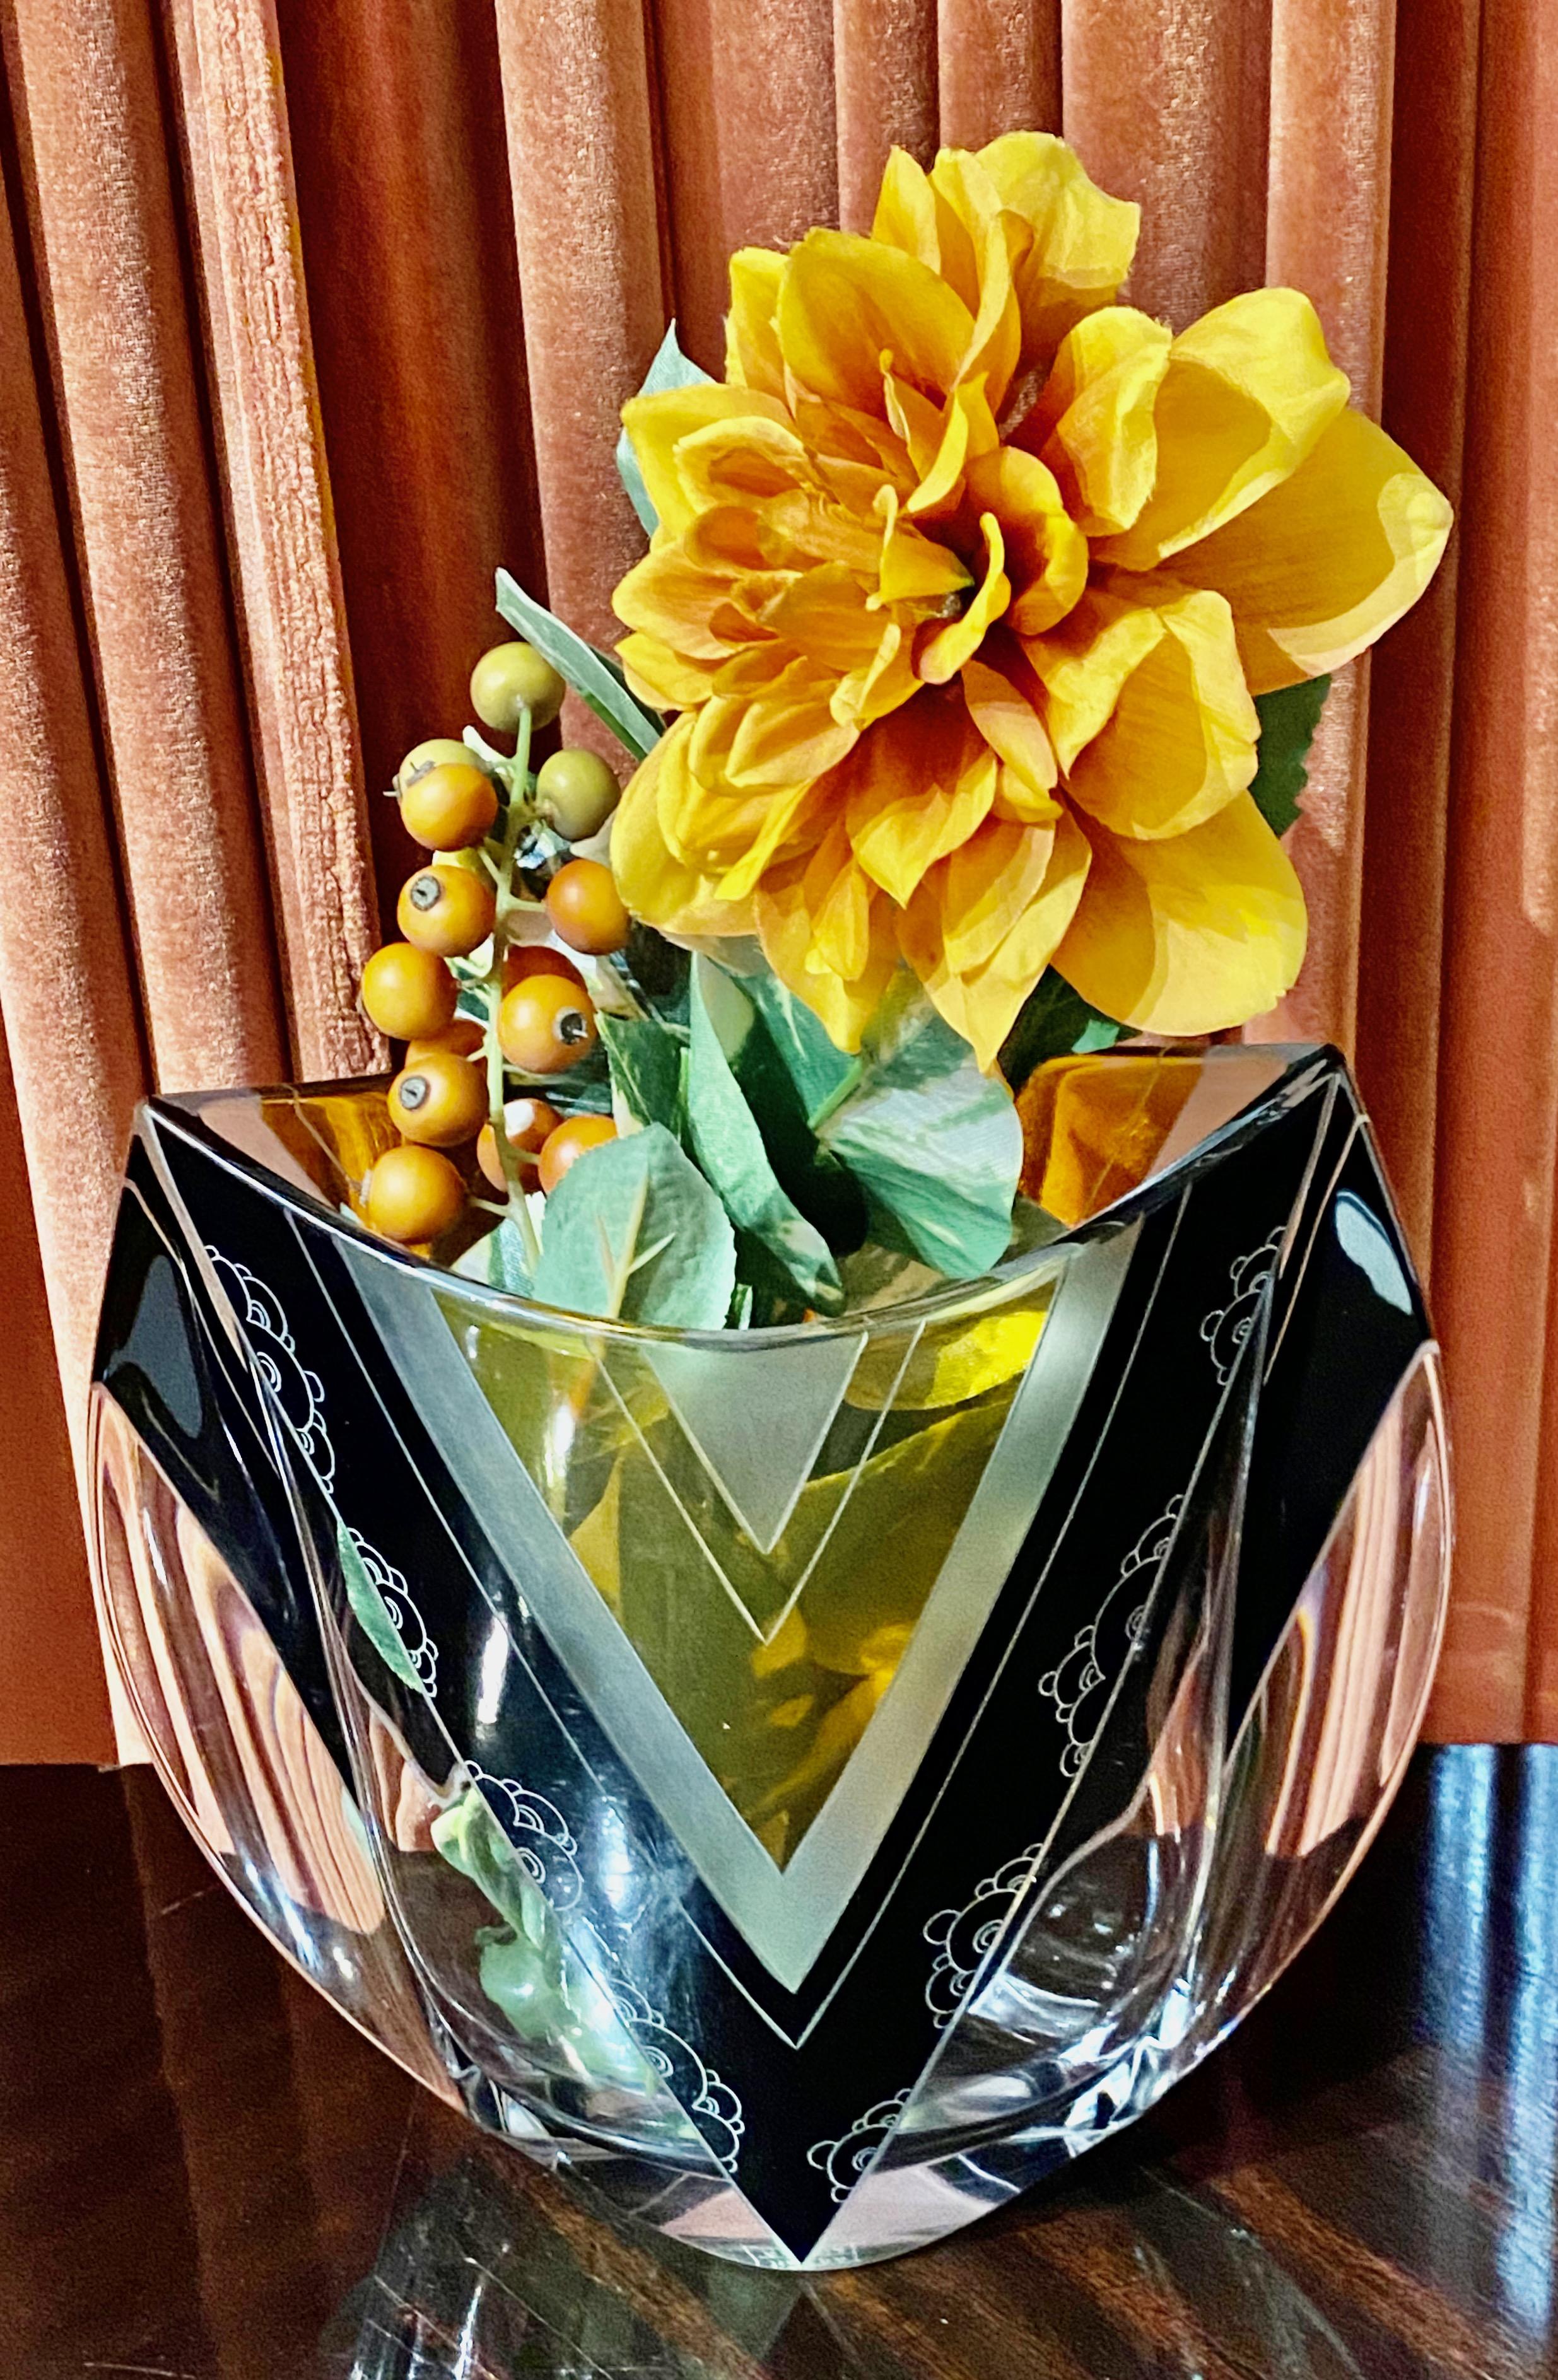 Art Deco vase 1930s Karl Palda, unusual shape with crescent moon opening. Marked on bottom Czechoslovakia, signed Haida Palda, meaning one from only very few made. Very rare and unique piece in yellow and black enamel with typical center Palda